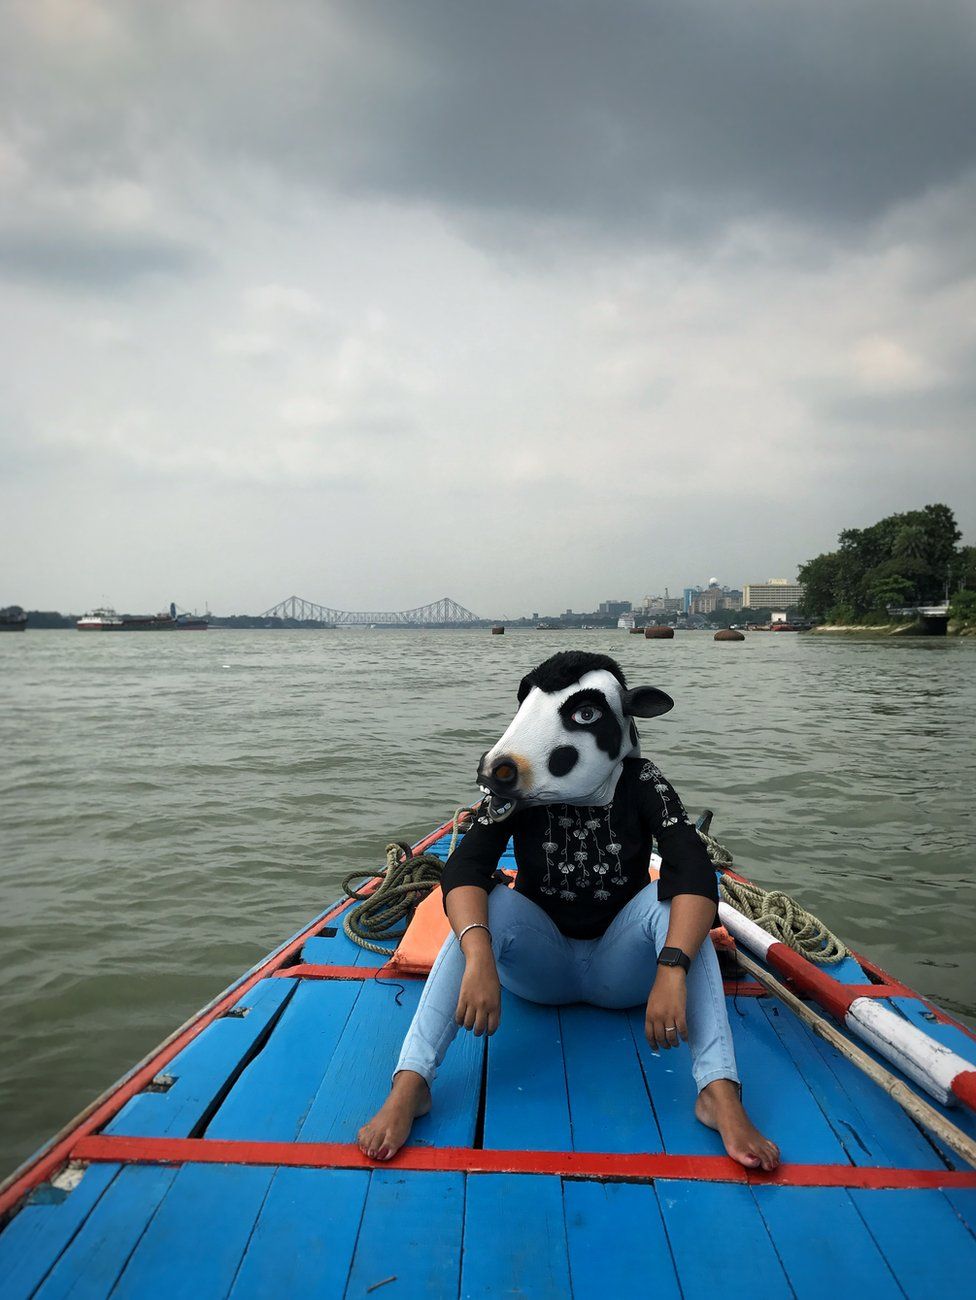 A woman with a cow mask on a boat